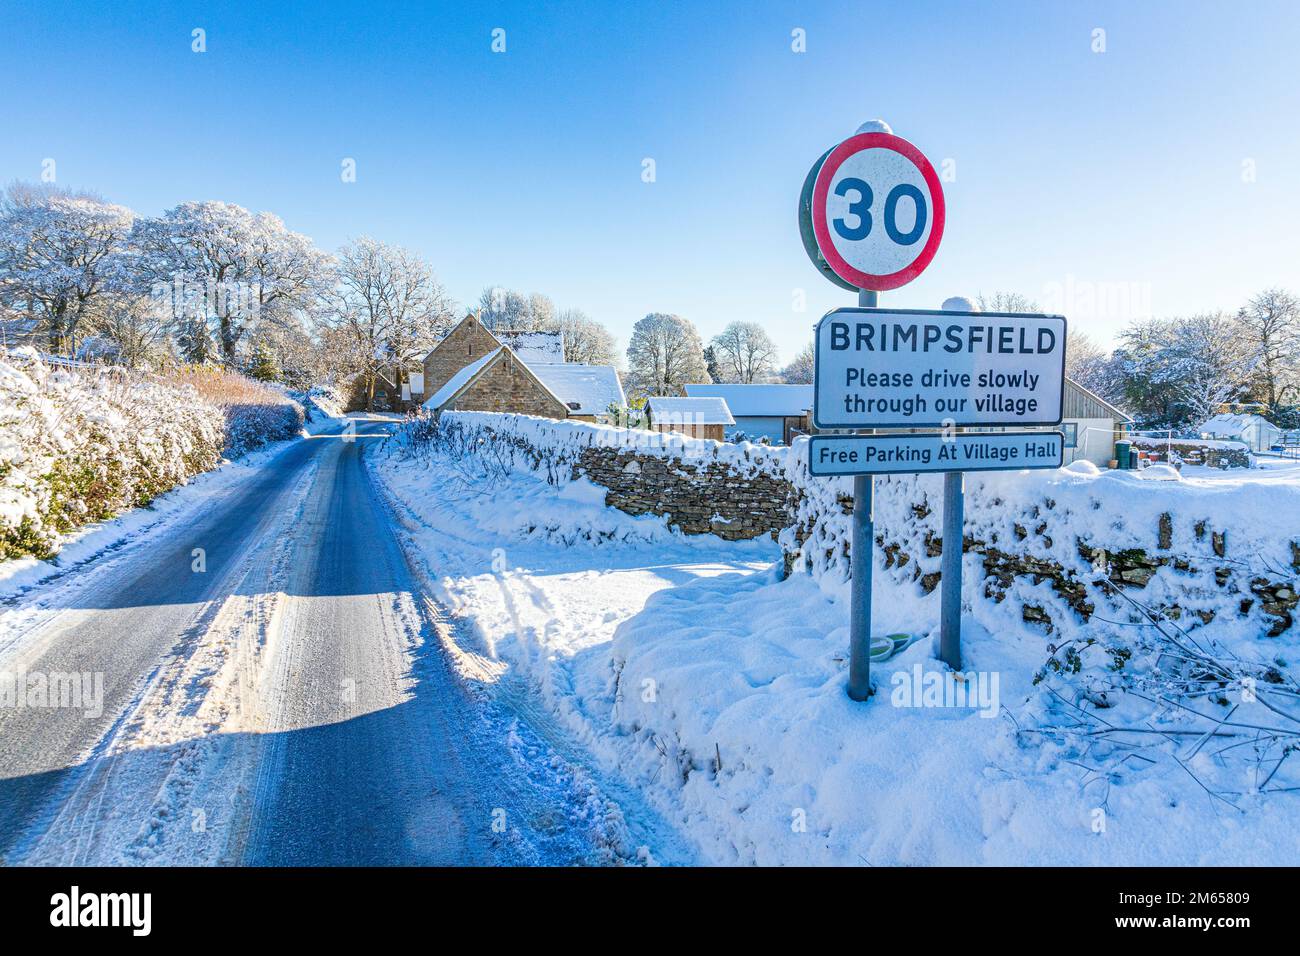 Early winter snow at the Cotswold village of Brimpsfield, Gloucestershire, England UK Stock Photo